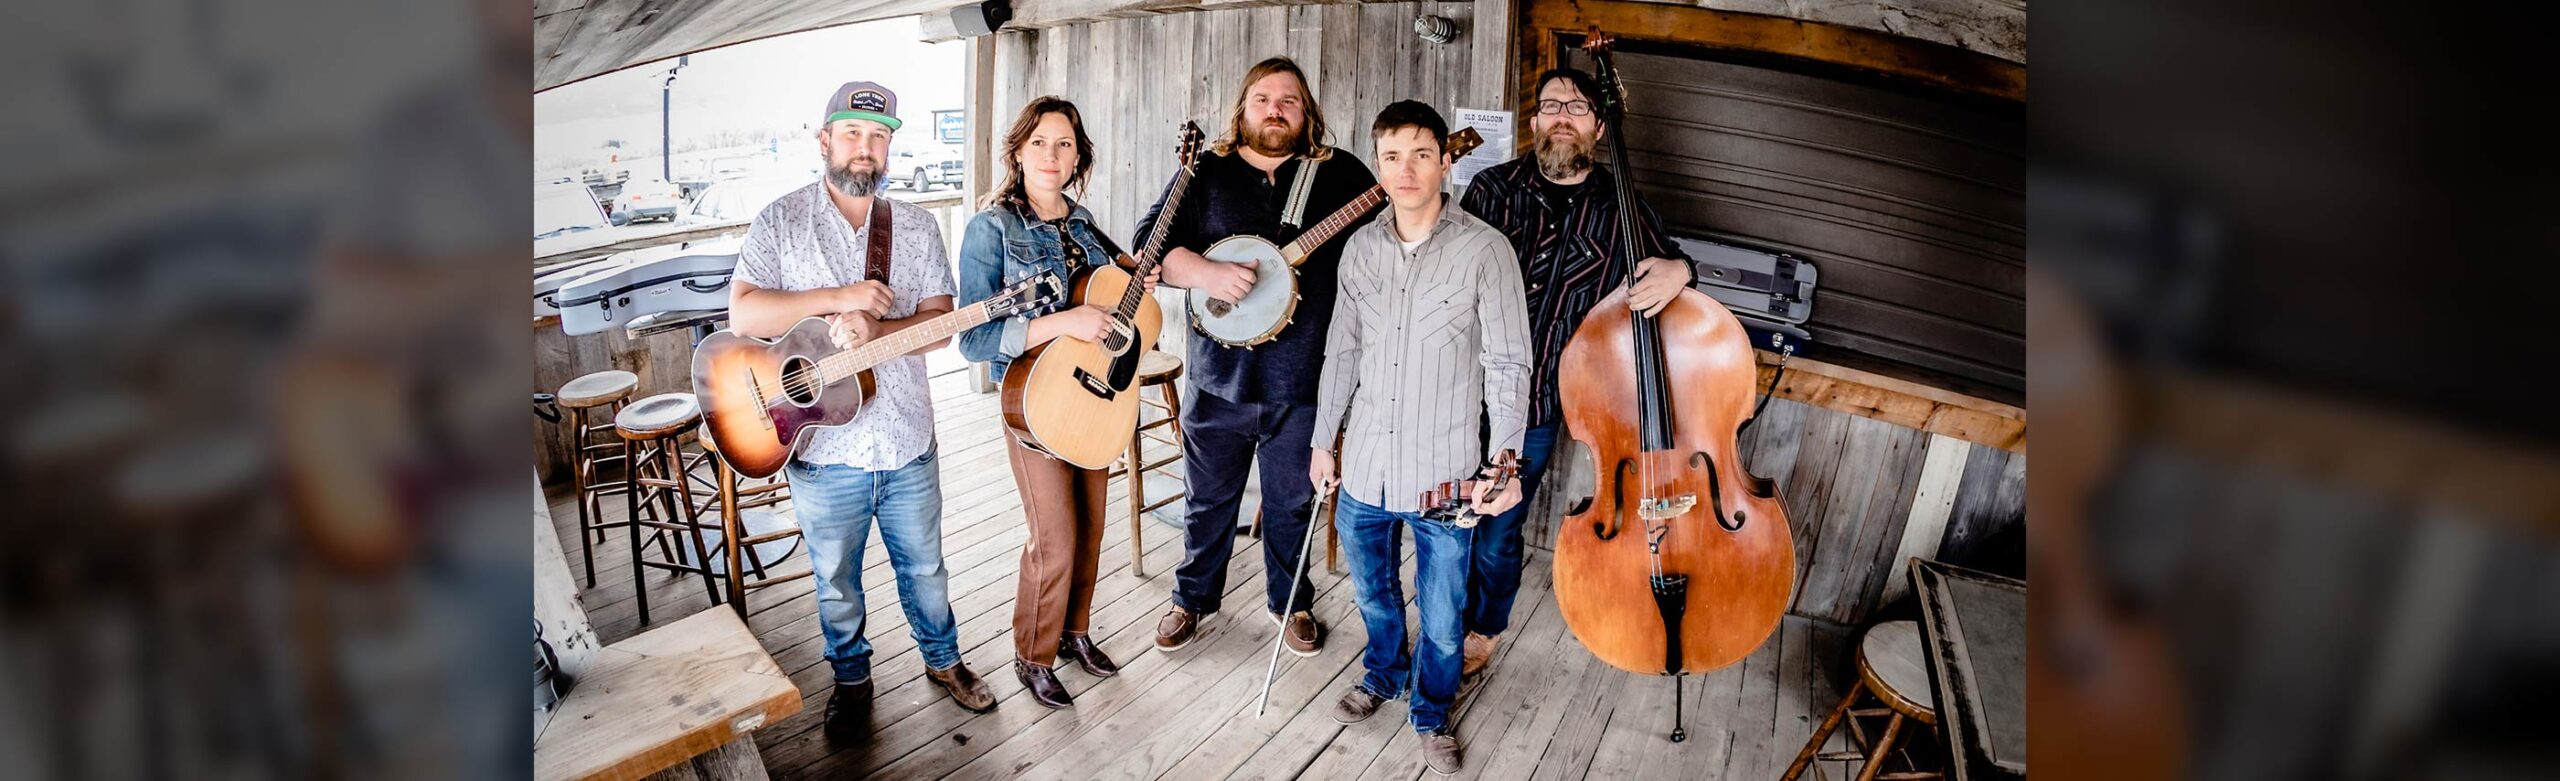 Bozeman’s Laney Lou & the Bird Dogs Announce Return to The ELM Image